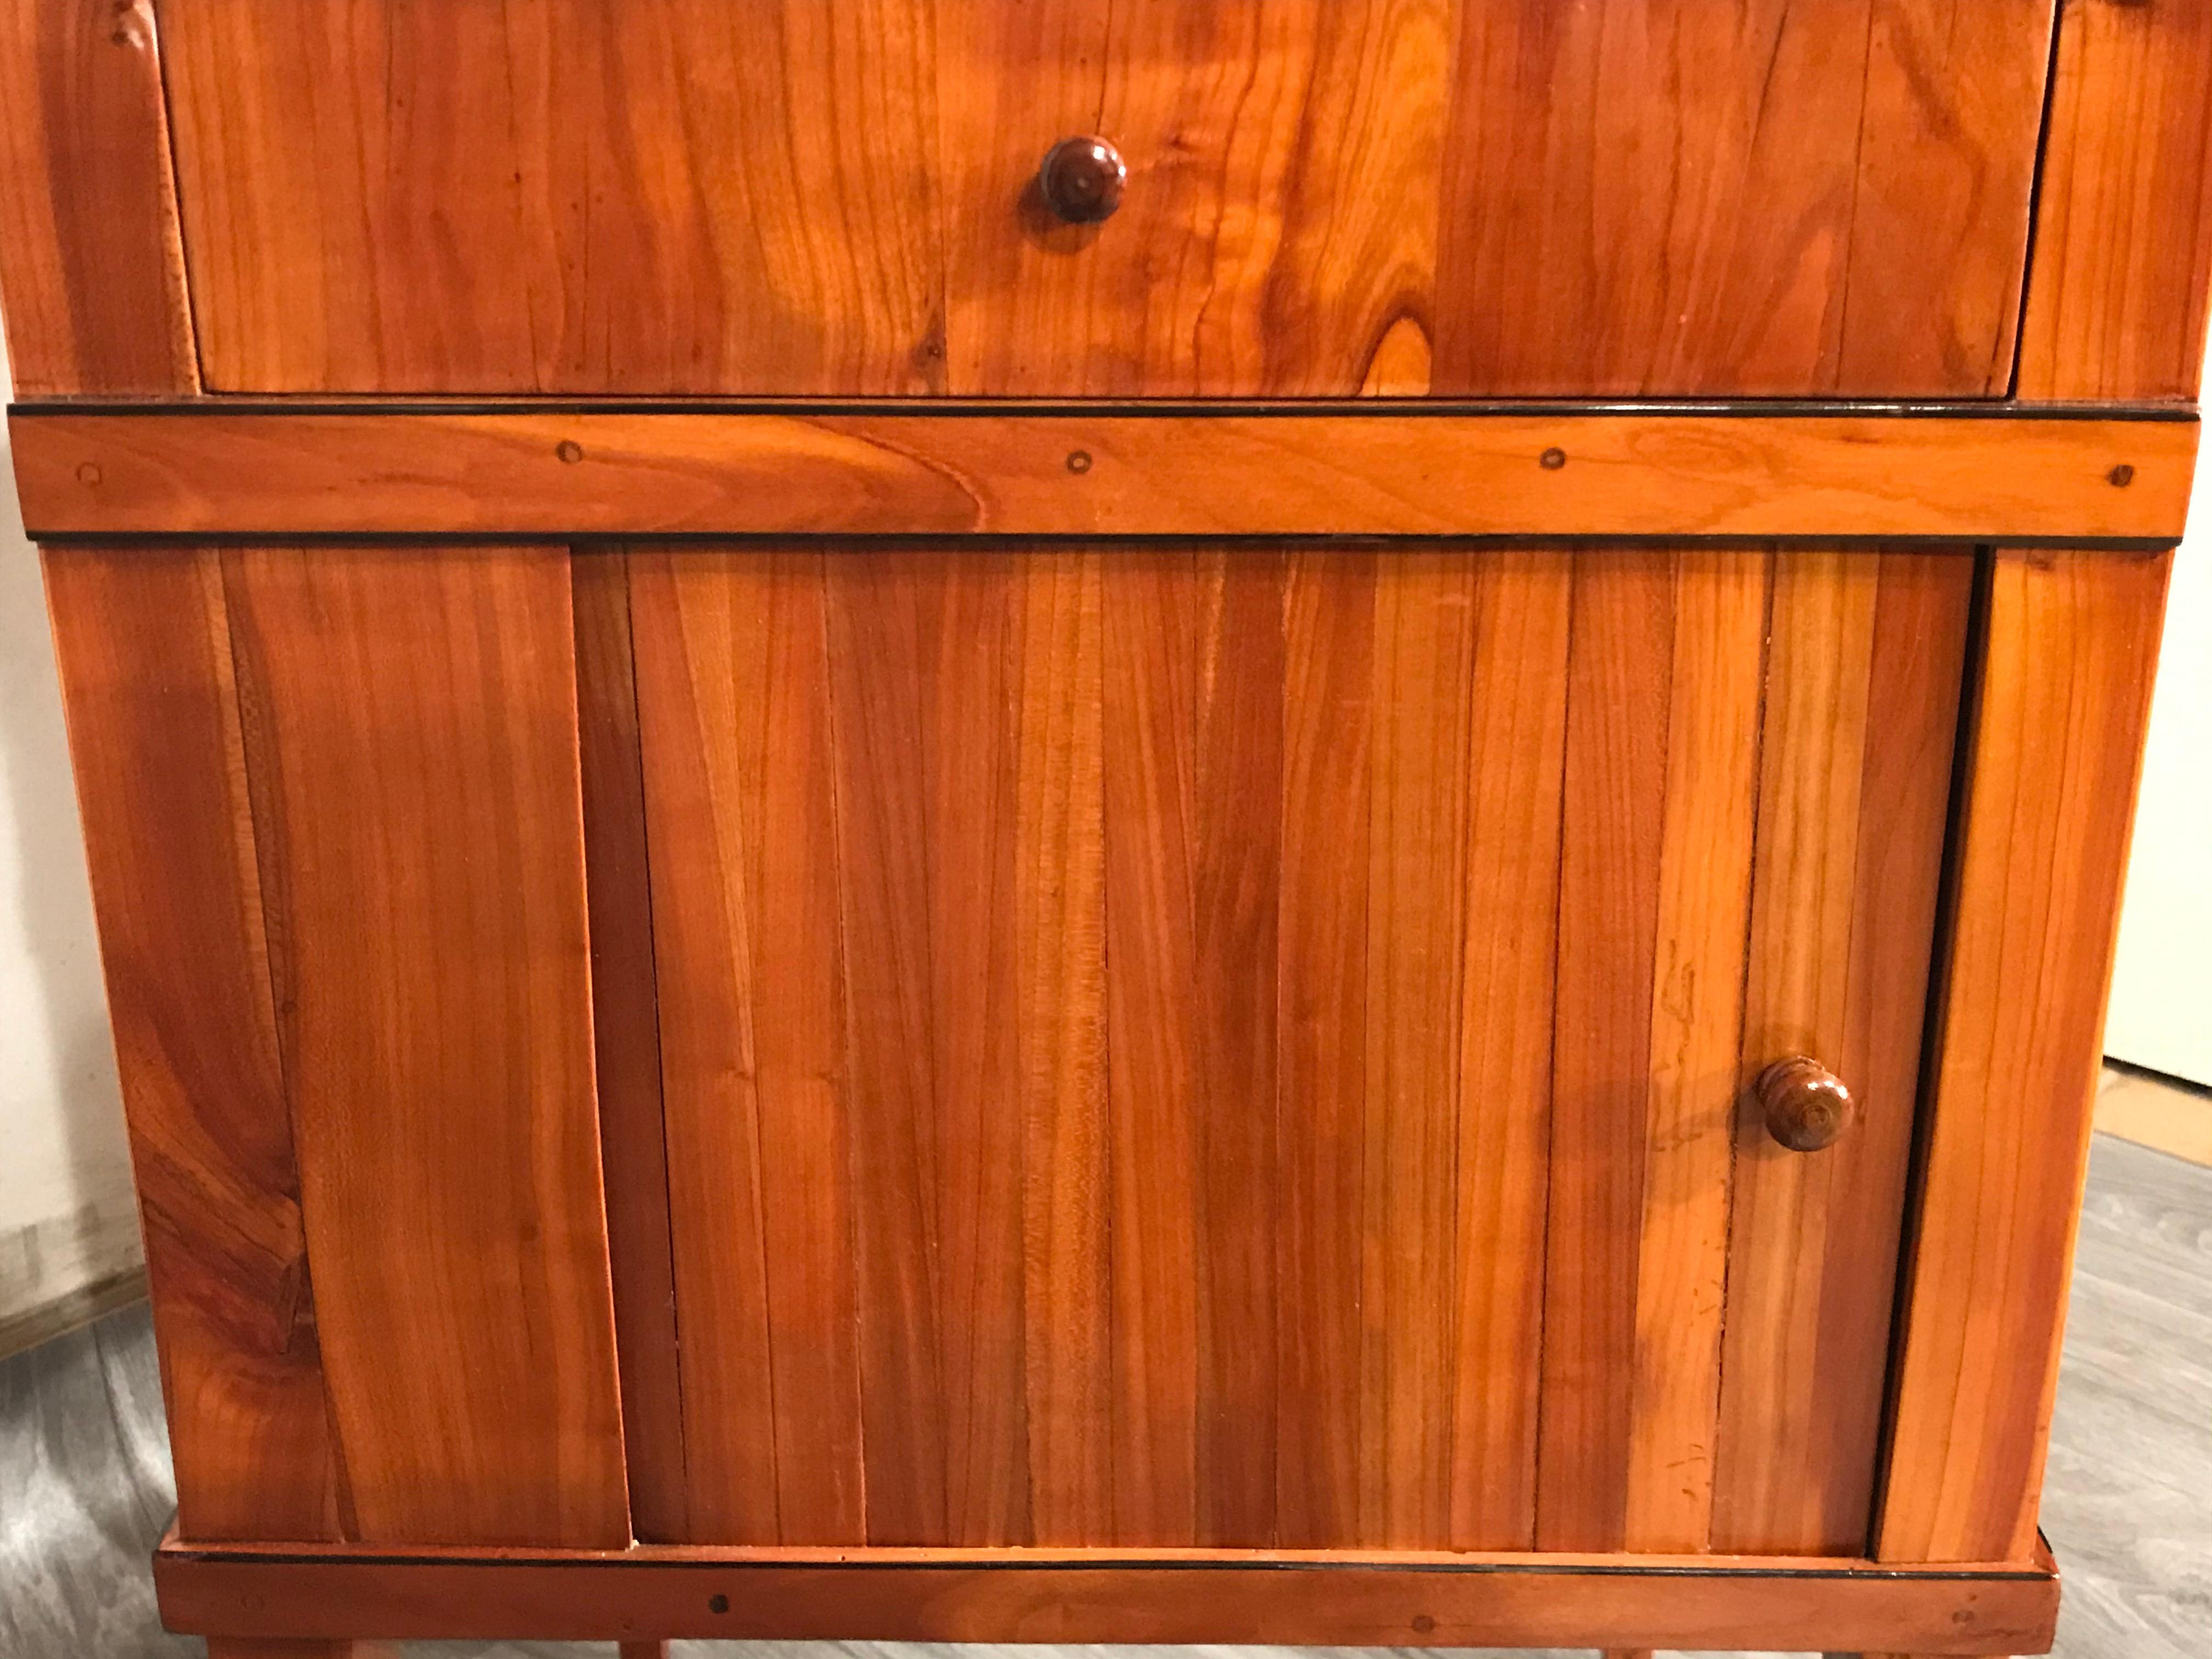 Biedermeier nightstand or small cabinet.
This beautiful night stand or small cabinet dates back to 1820 and comes from Southern Germany. It has a pretty blinds door and one drawer. An open work wooden gallery is framing the top. Cherrywood veneer